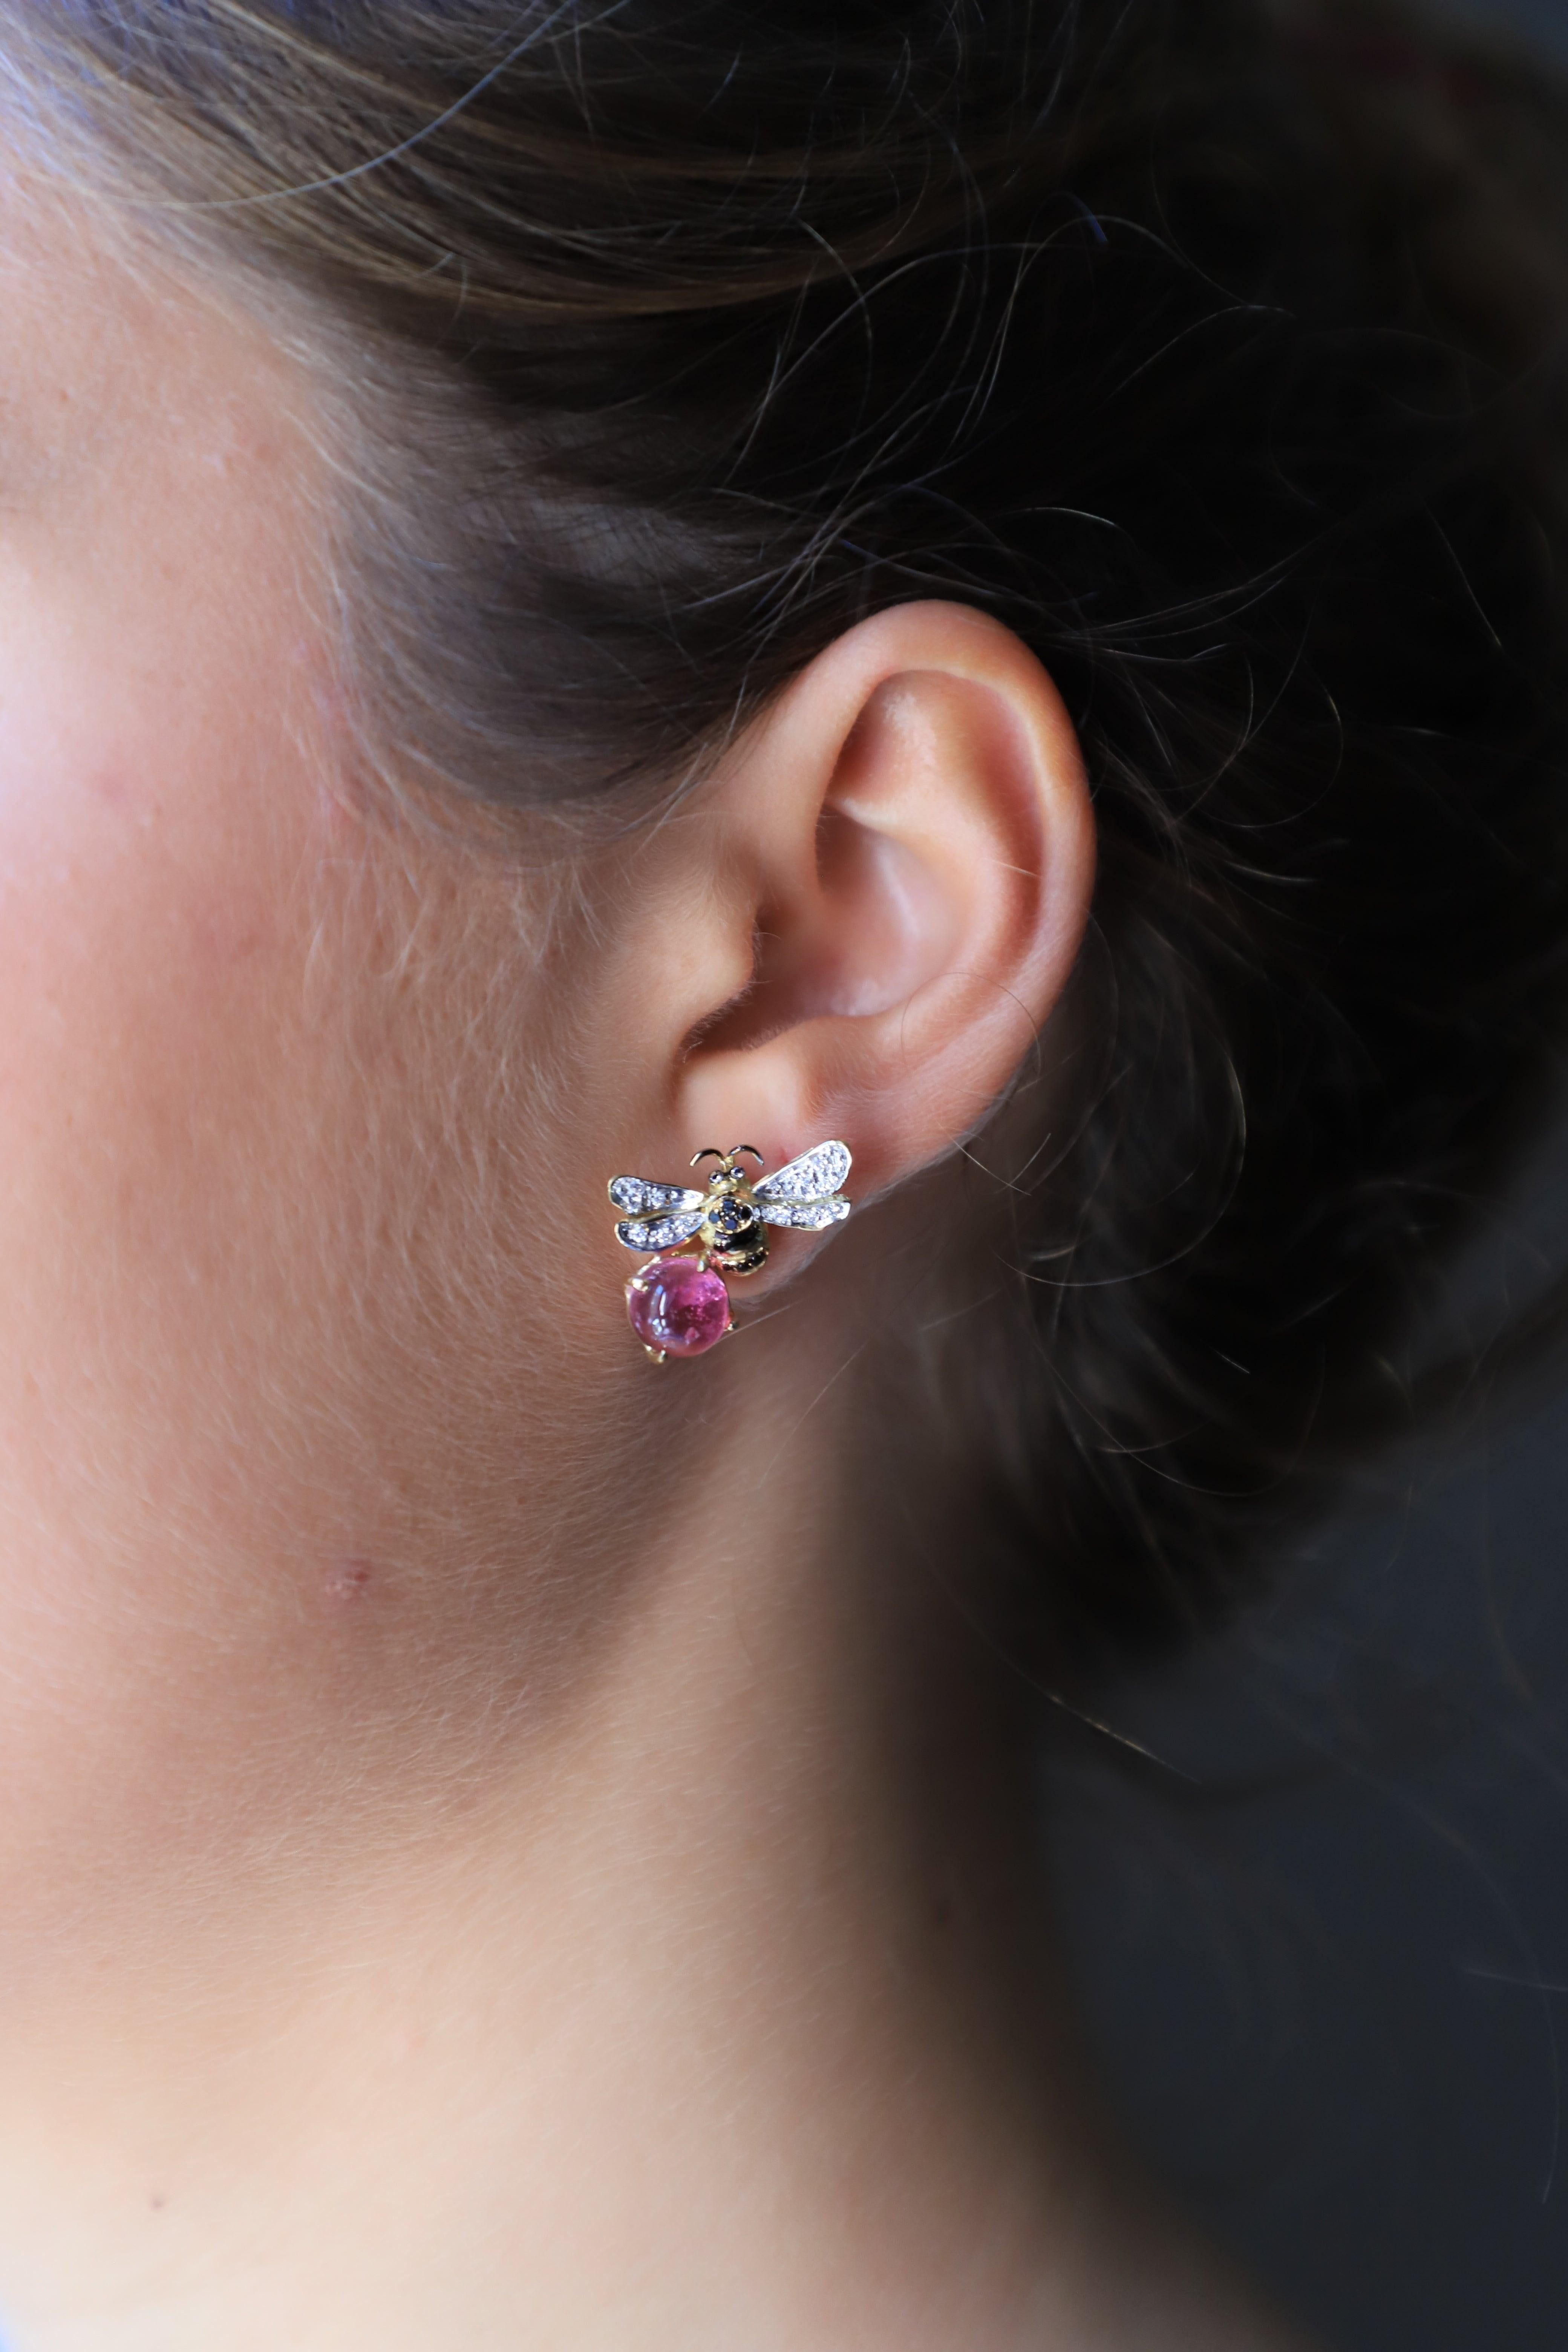 Rossella Ugolini Design Collection,  a pair of Bees Stud Earrings handcrafted in 18 Karat Yellow Gold 5.5 Karat Pink & Green Tourmaline 0.16 Karat White Diamond 0.18 Karat Black Diamonds .
The two different colors of pink and green tourmalines make